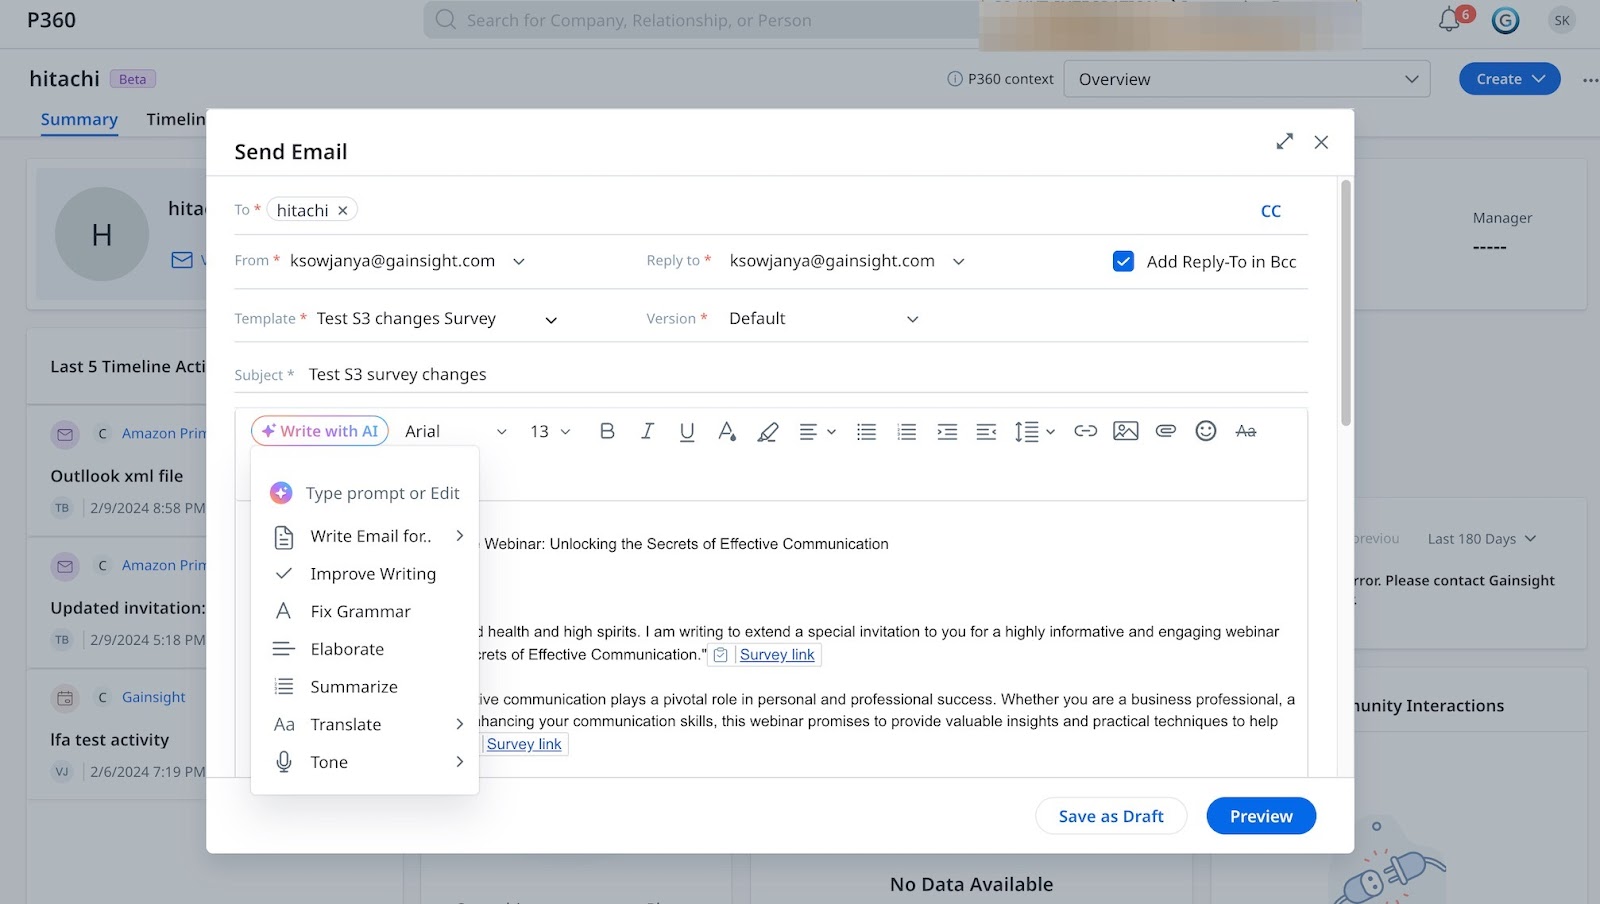 A screenshot of Gainsight's 'Send Email' interface in P360 with fields for recipients, a 'Write with AI' feature highlighted.